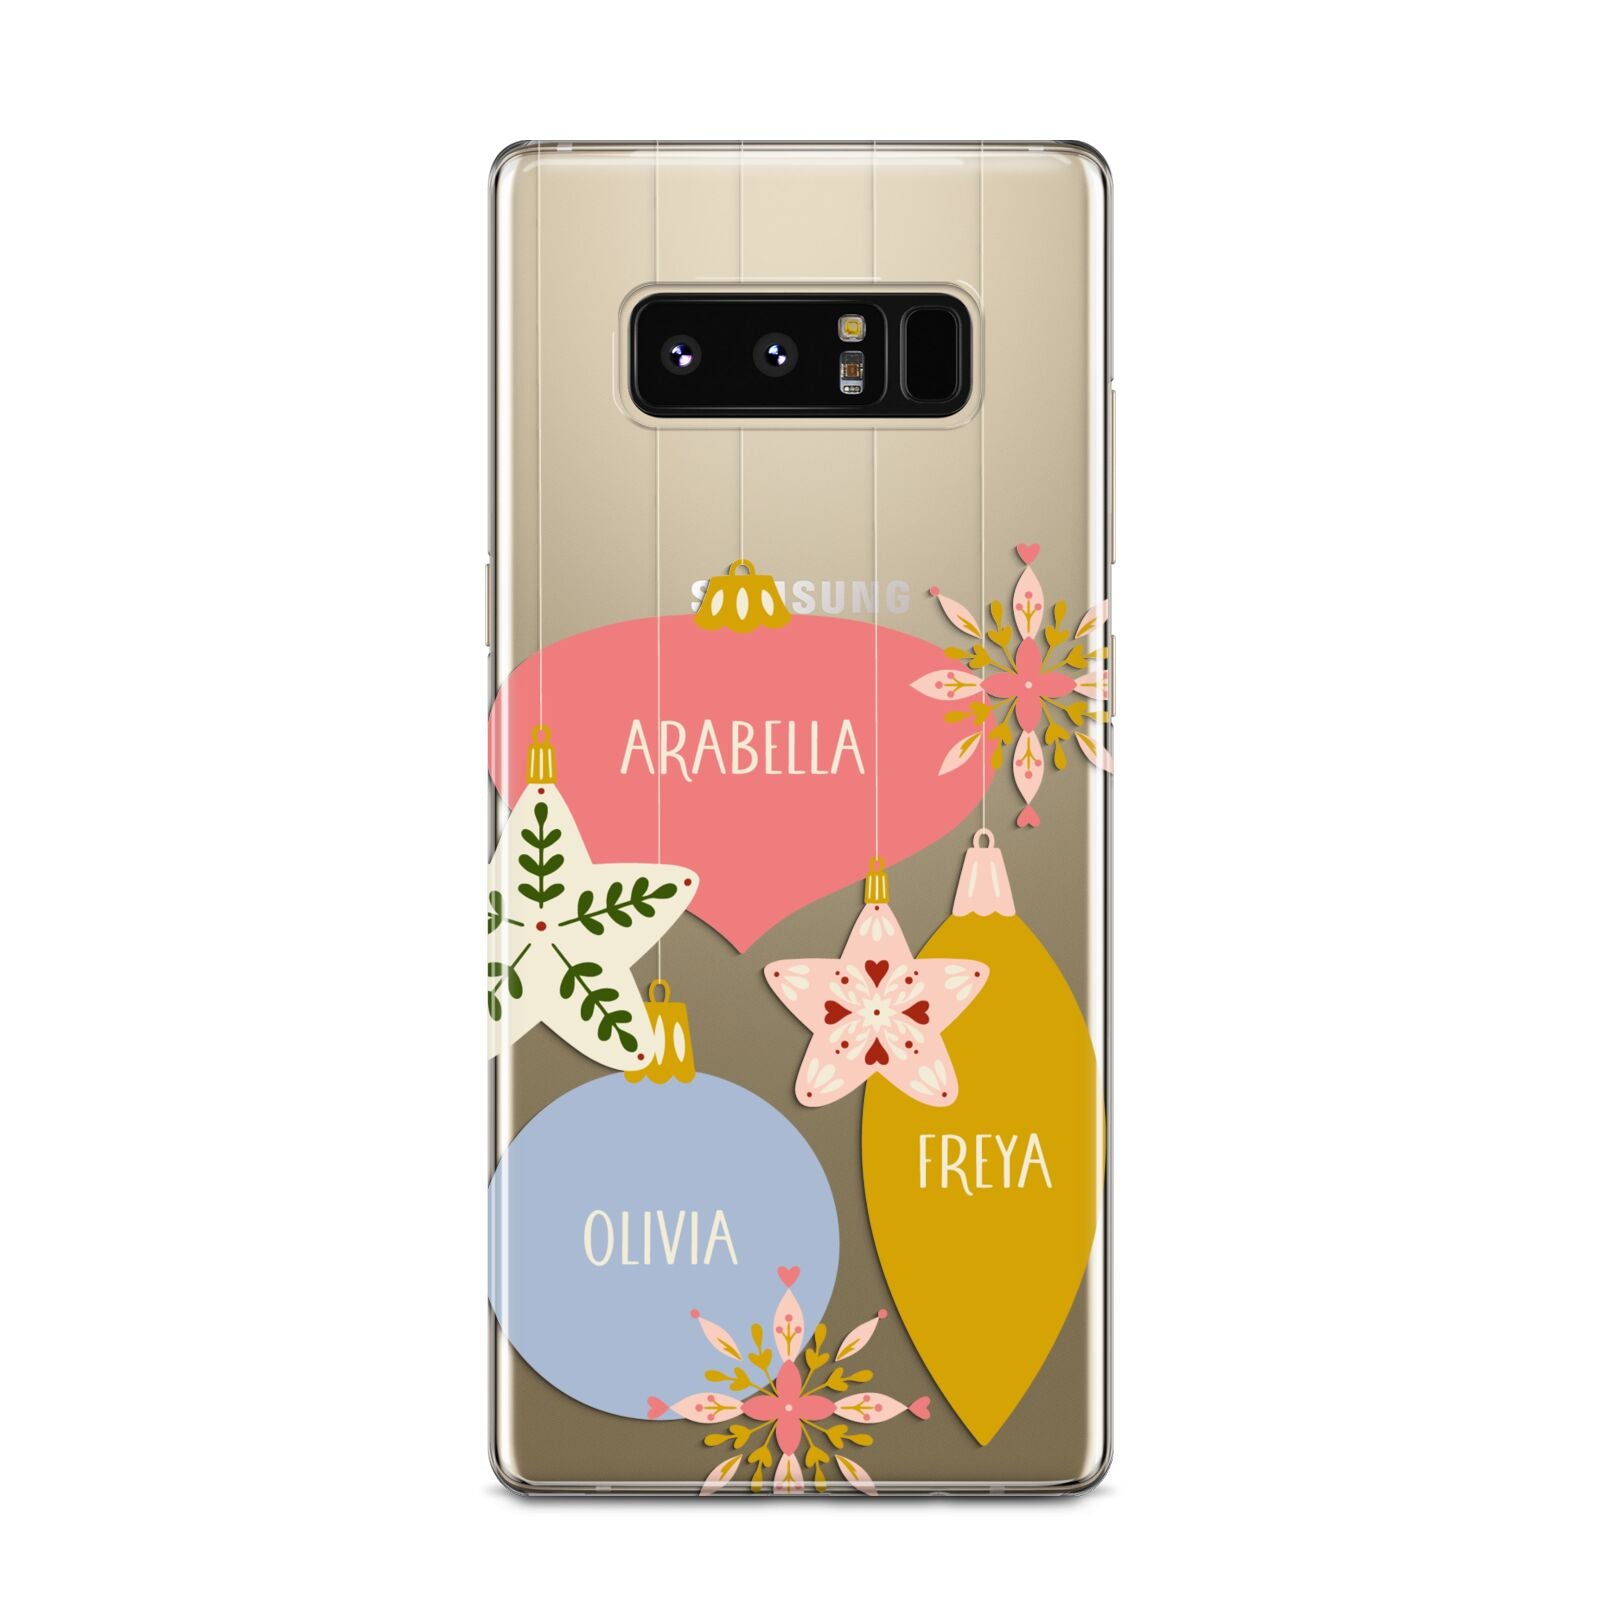 Personalised Christmas Bauble Samsung Galaxy Note 8 Case